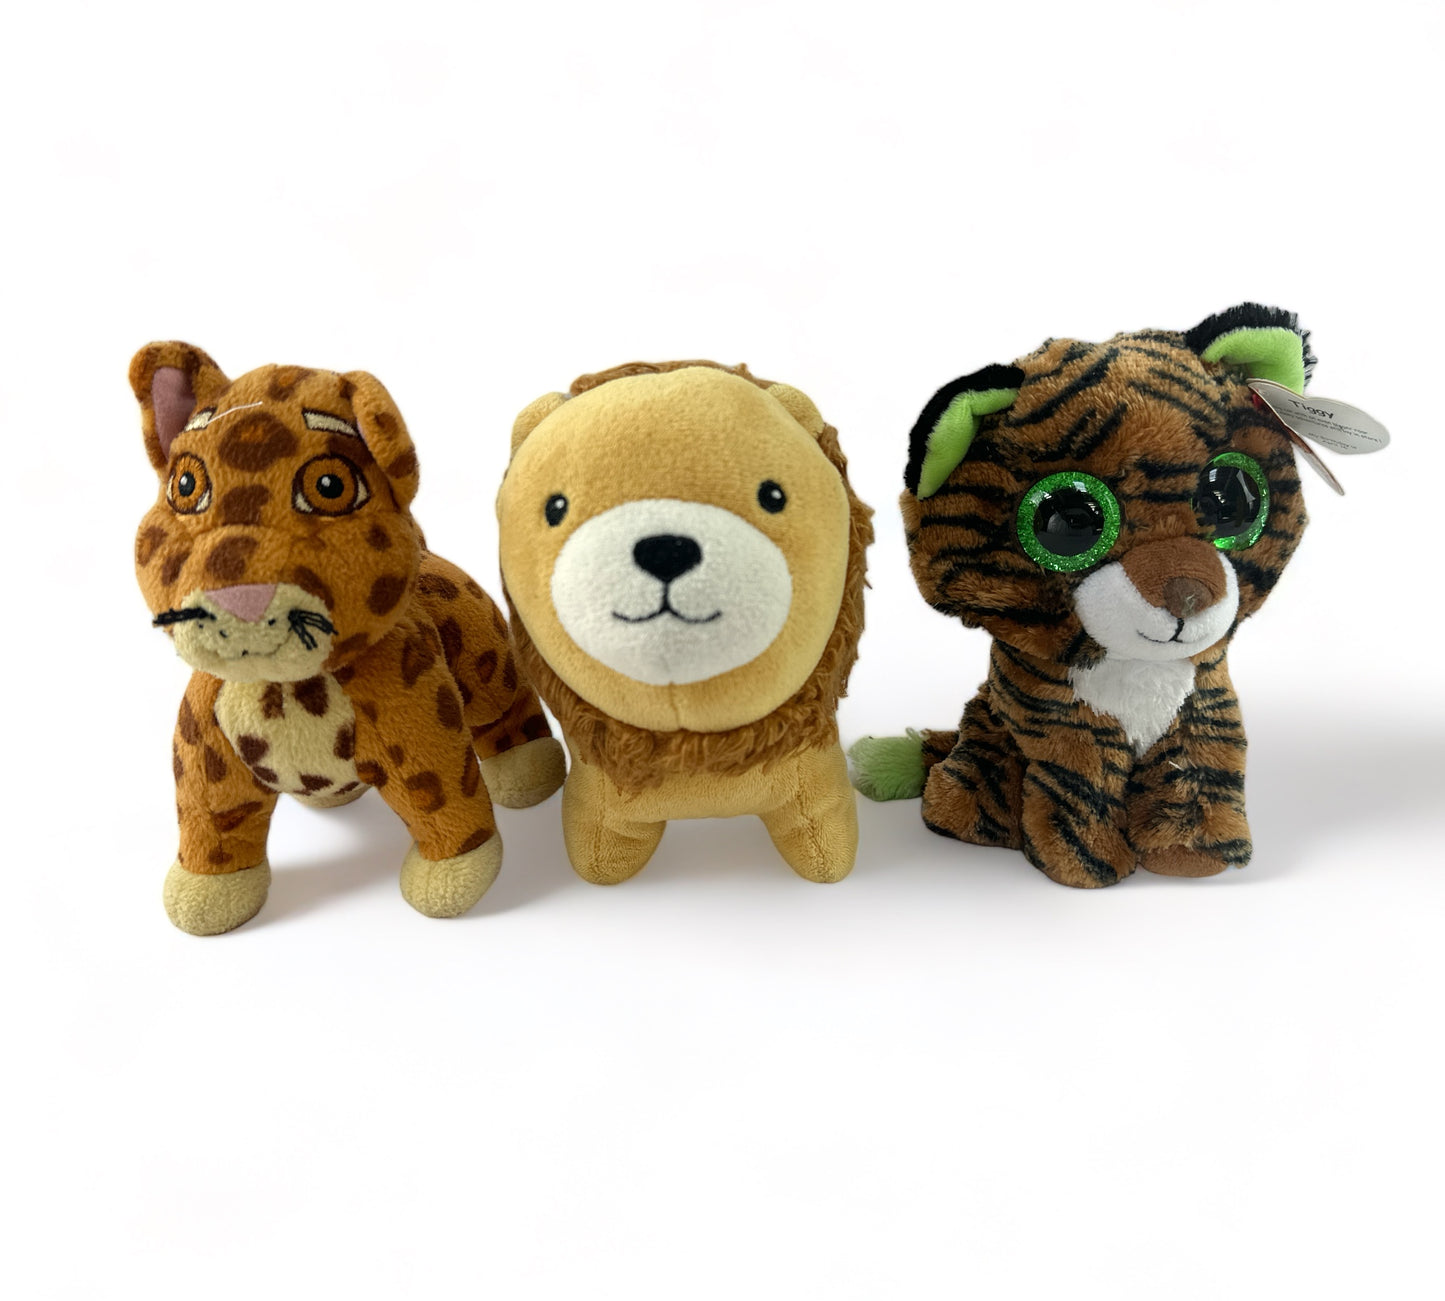 Friends of the Jungle Plushie Set Featuring Baby Jaguar, Baby Tiger and Lion